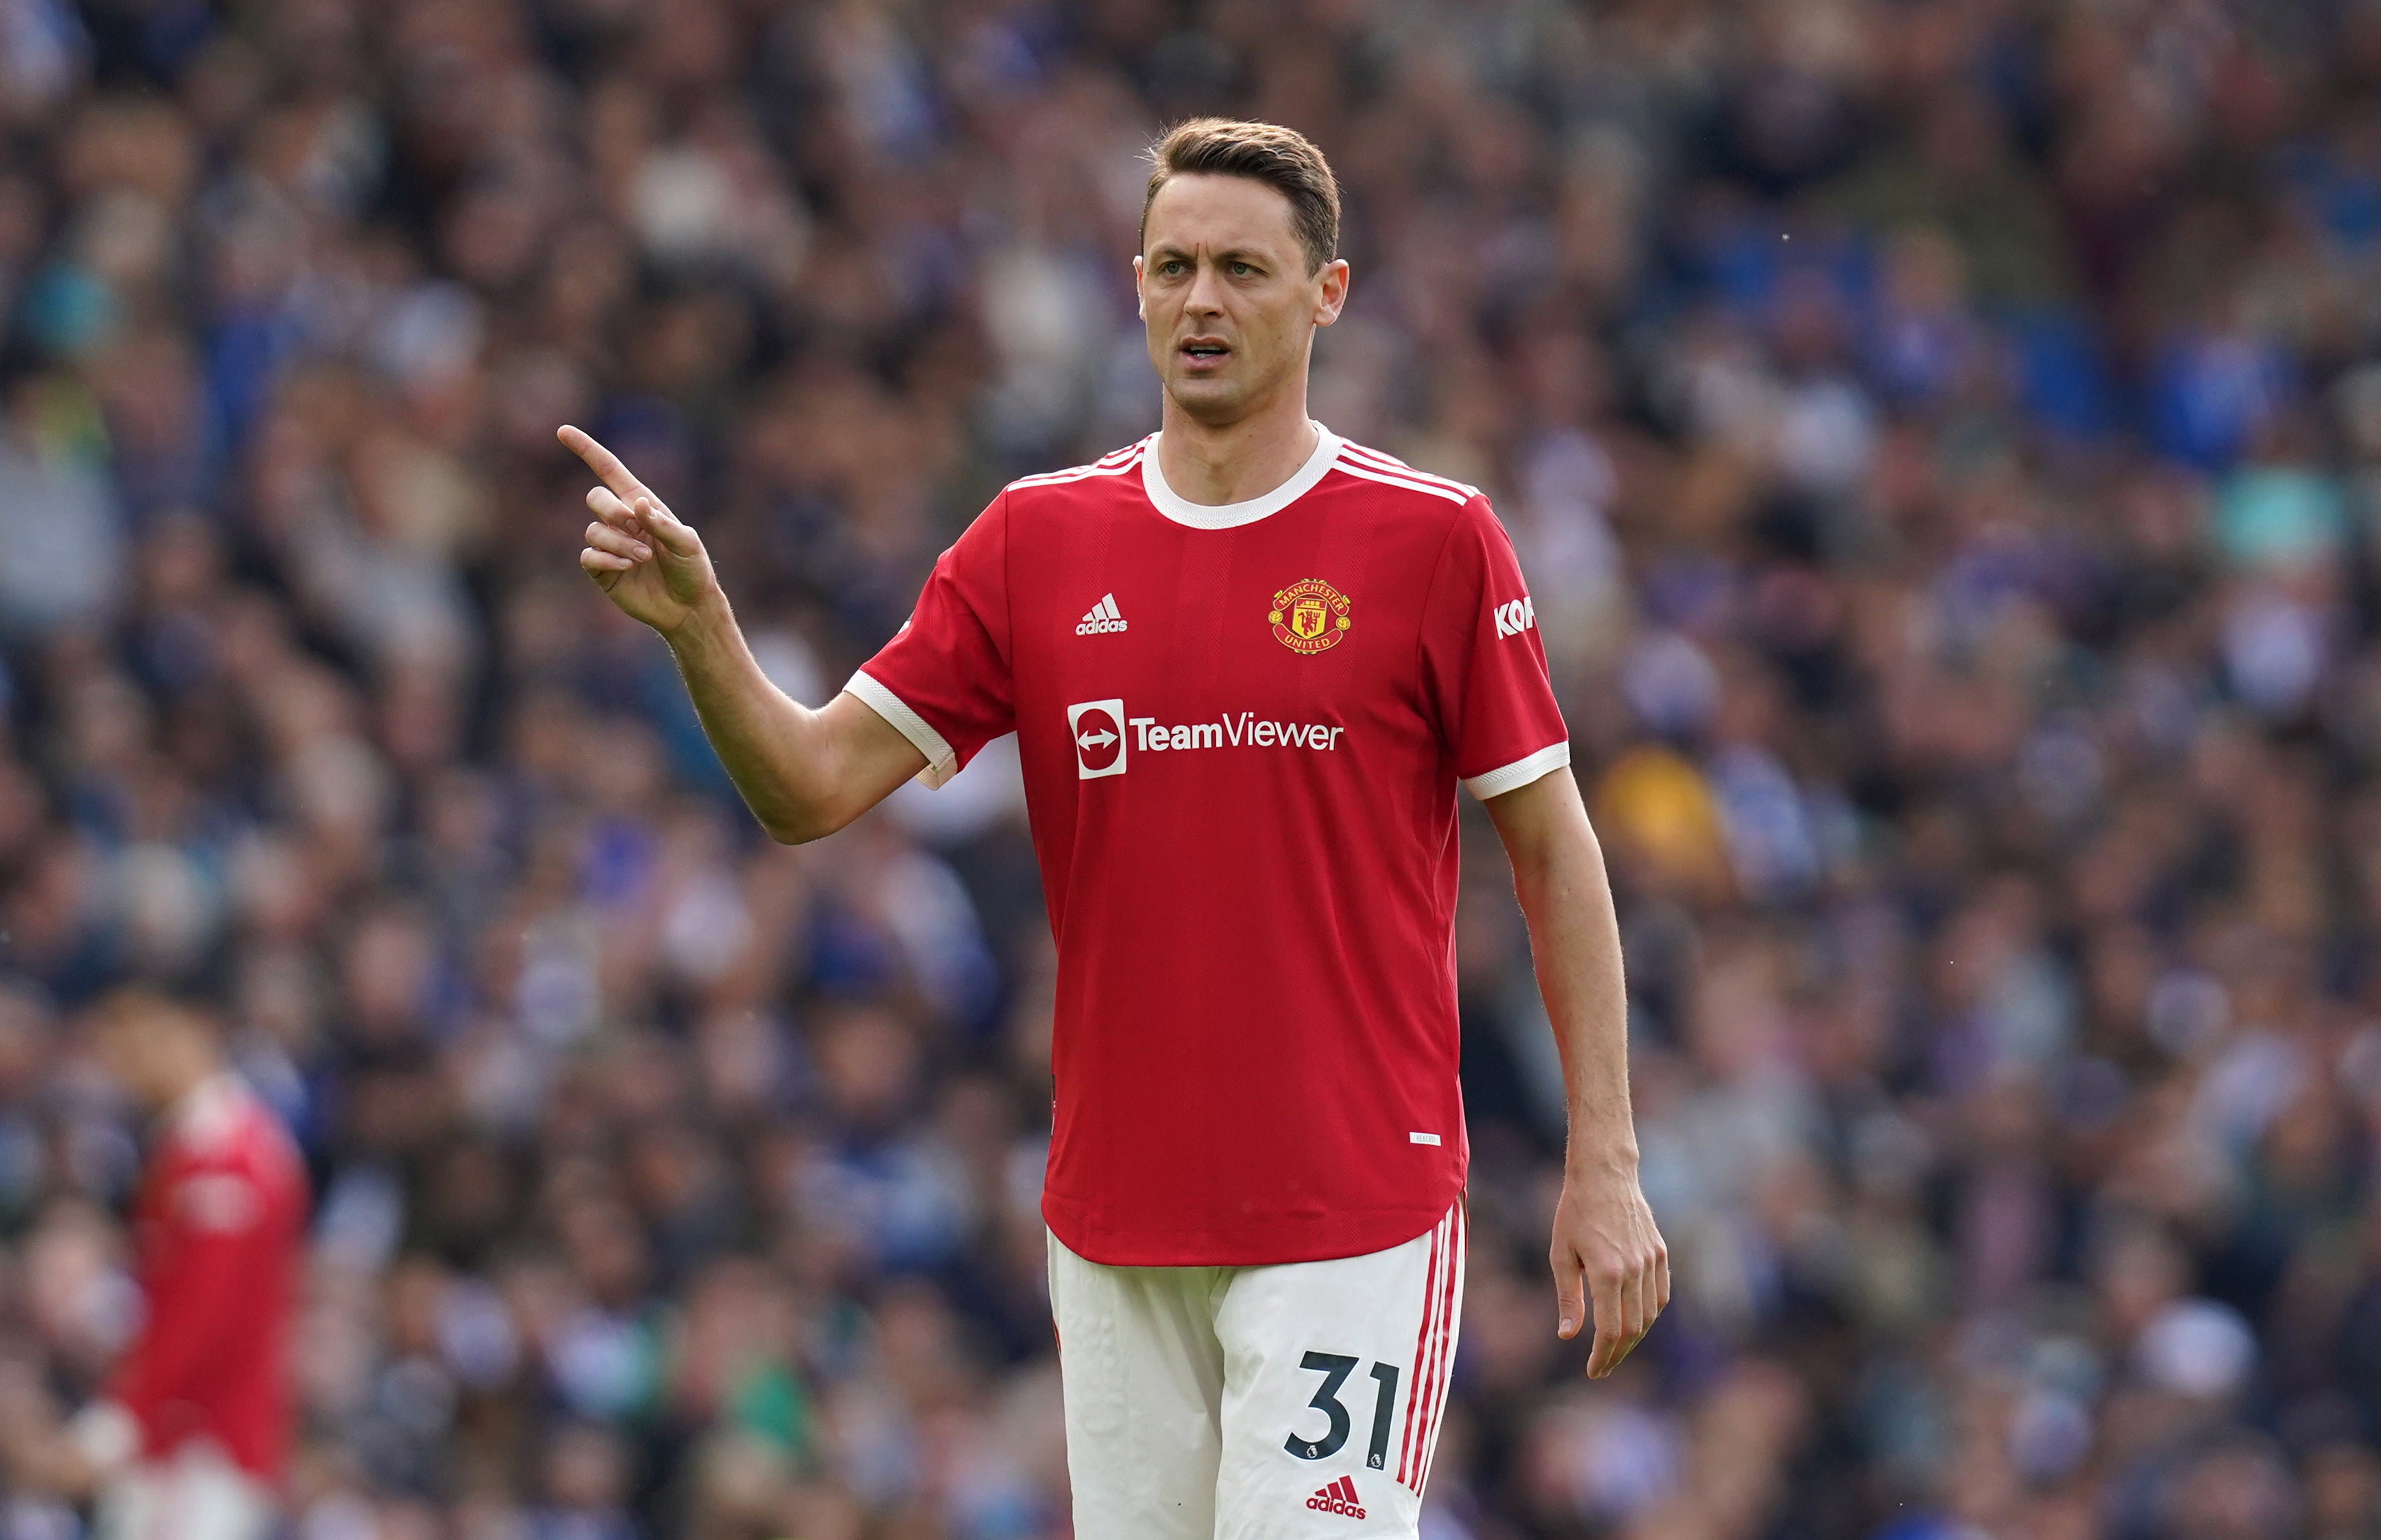 Nemanja Matic is reunited with Jose Mourinho at Roma after spending five seasons at Manchester United (Gareth Fuller/PA)